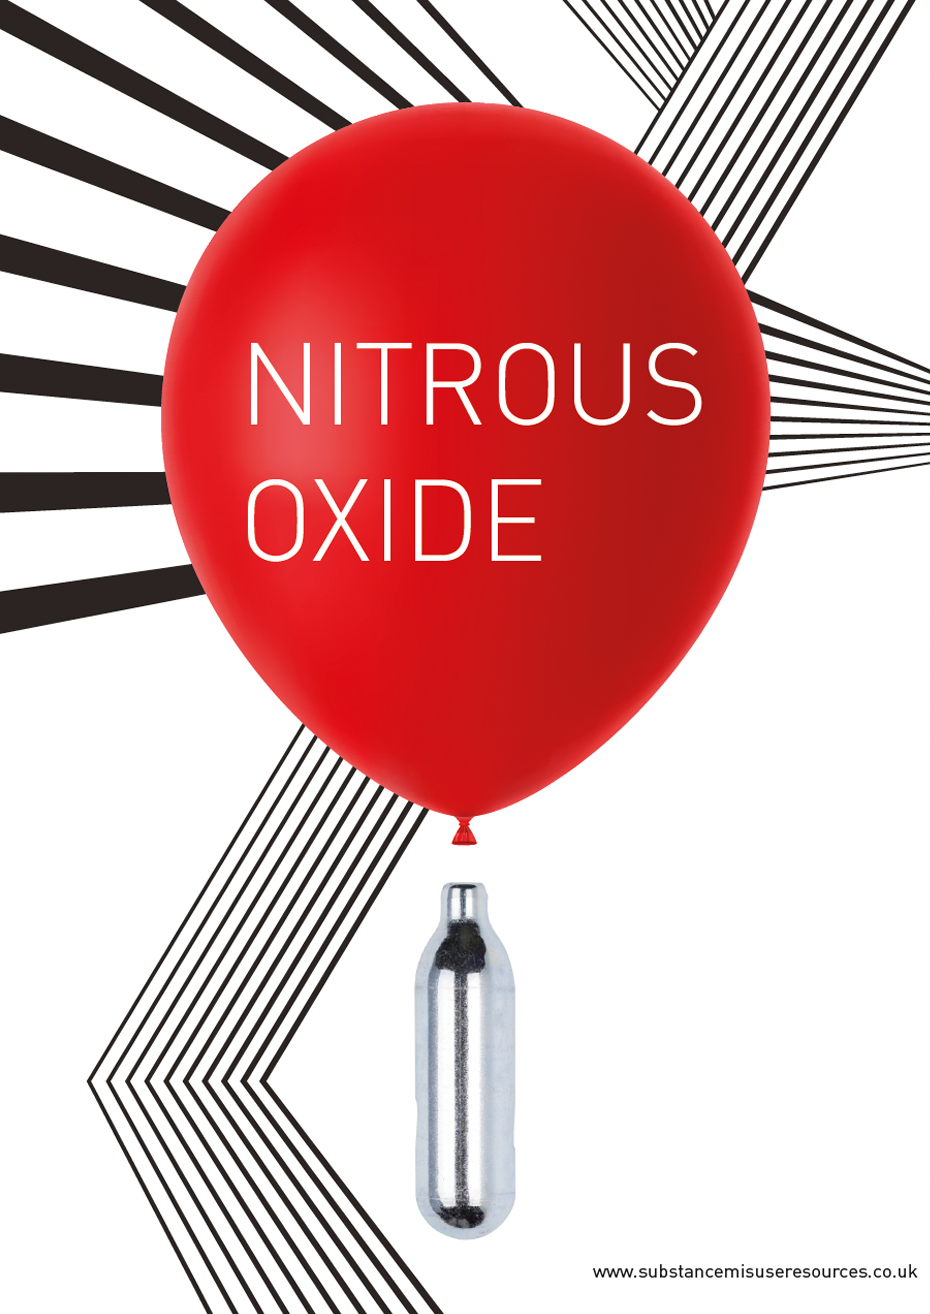 Cover of nitrous oxide information resource showing balloon and whippet